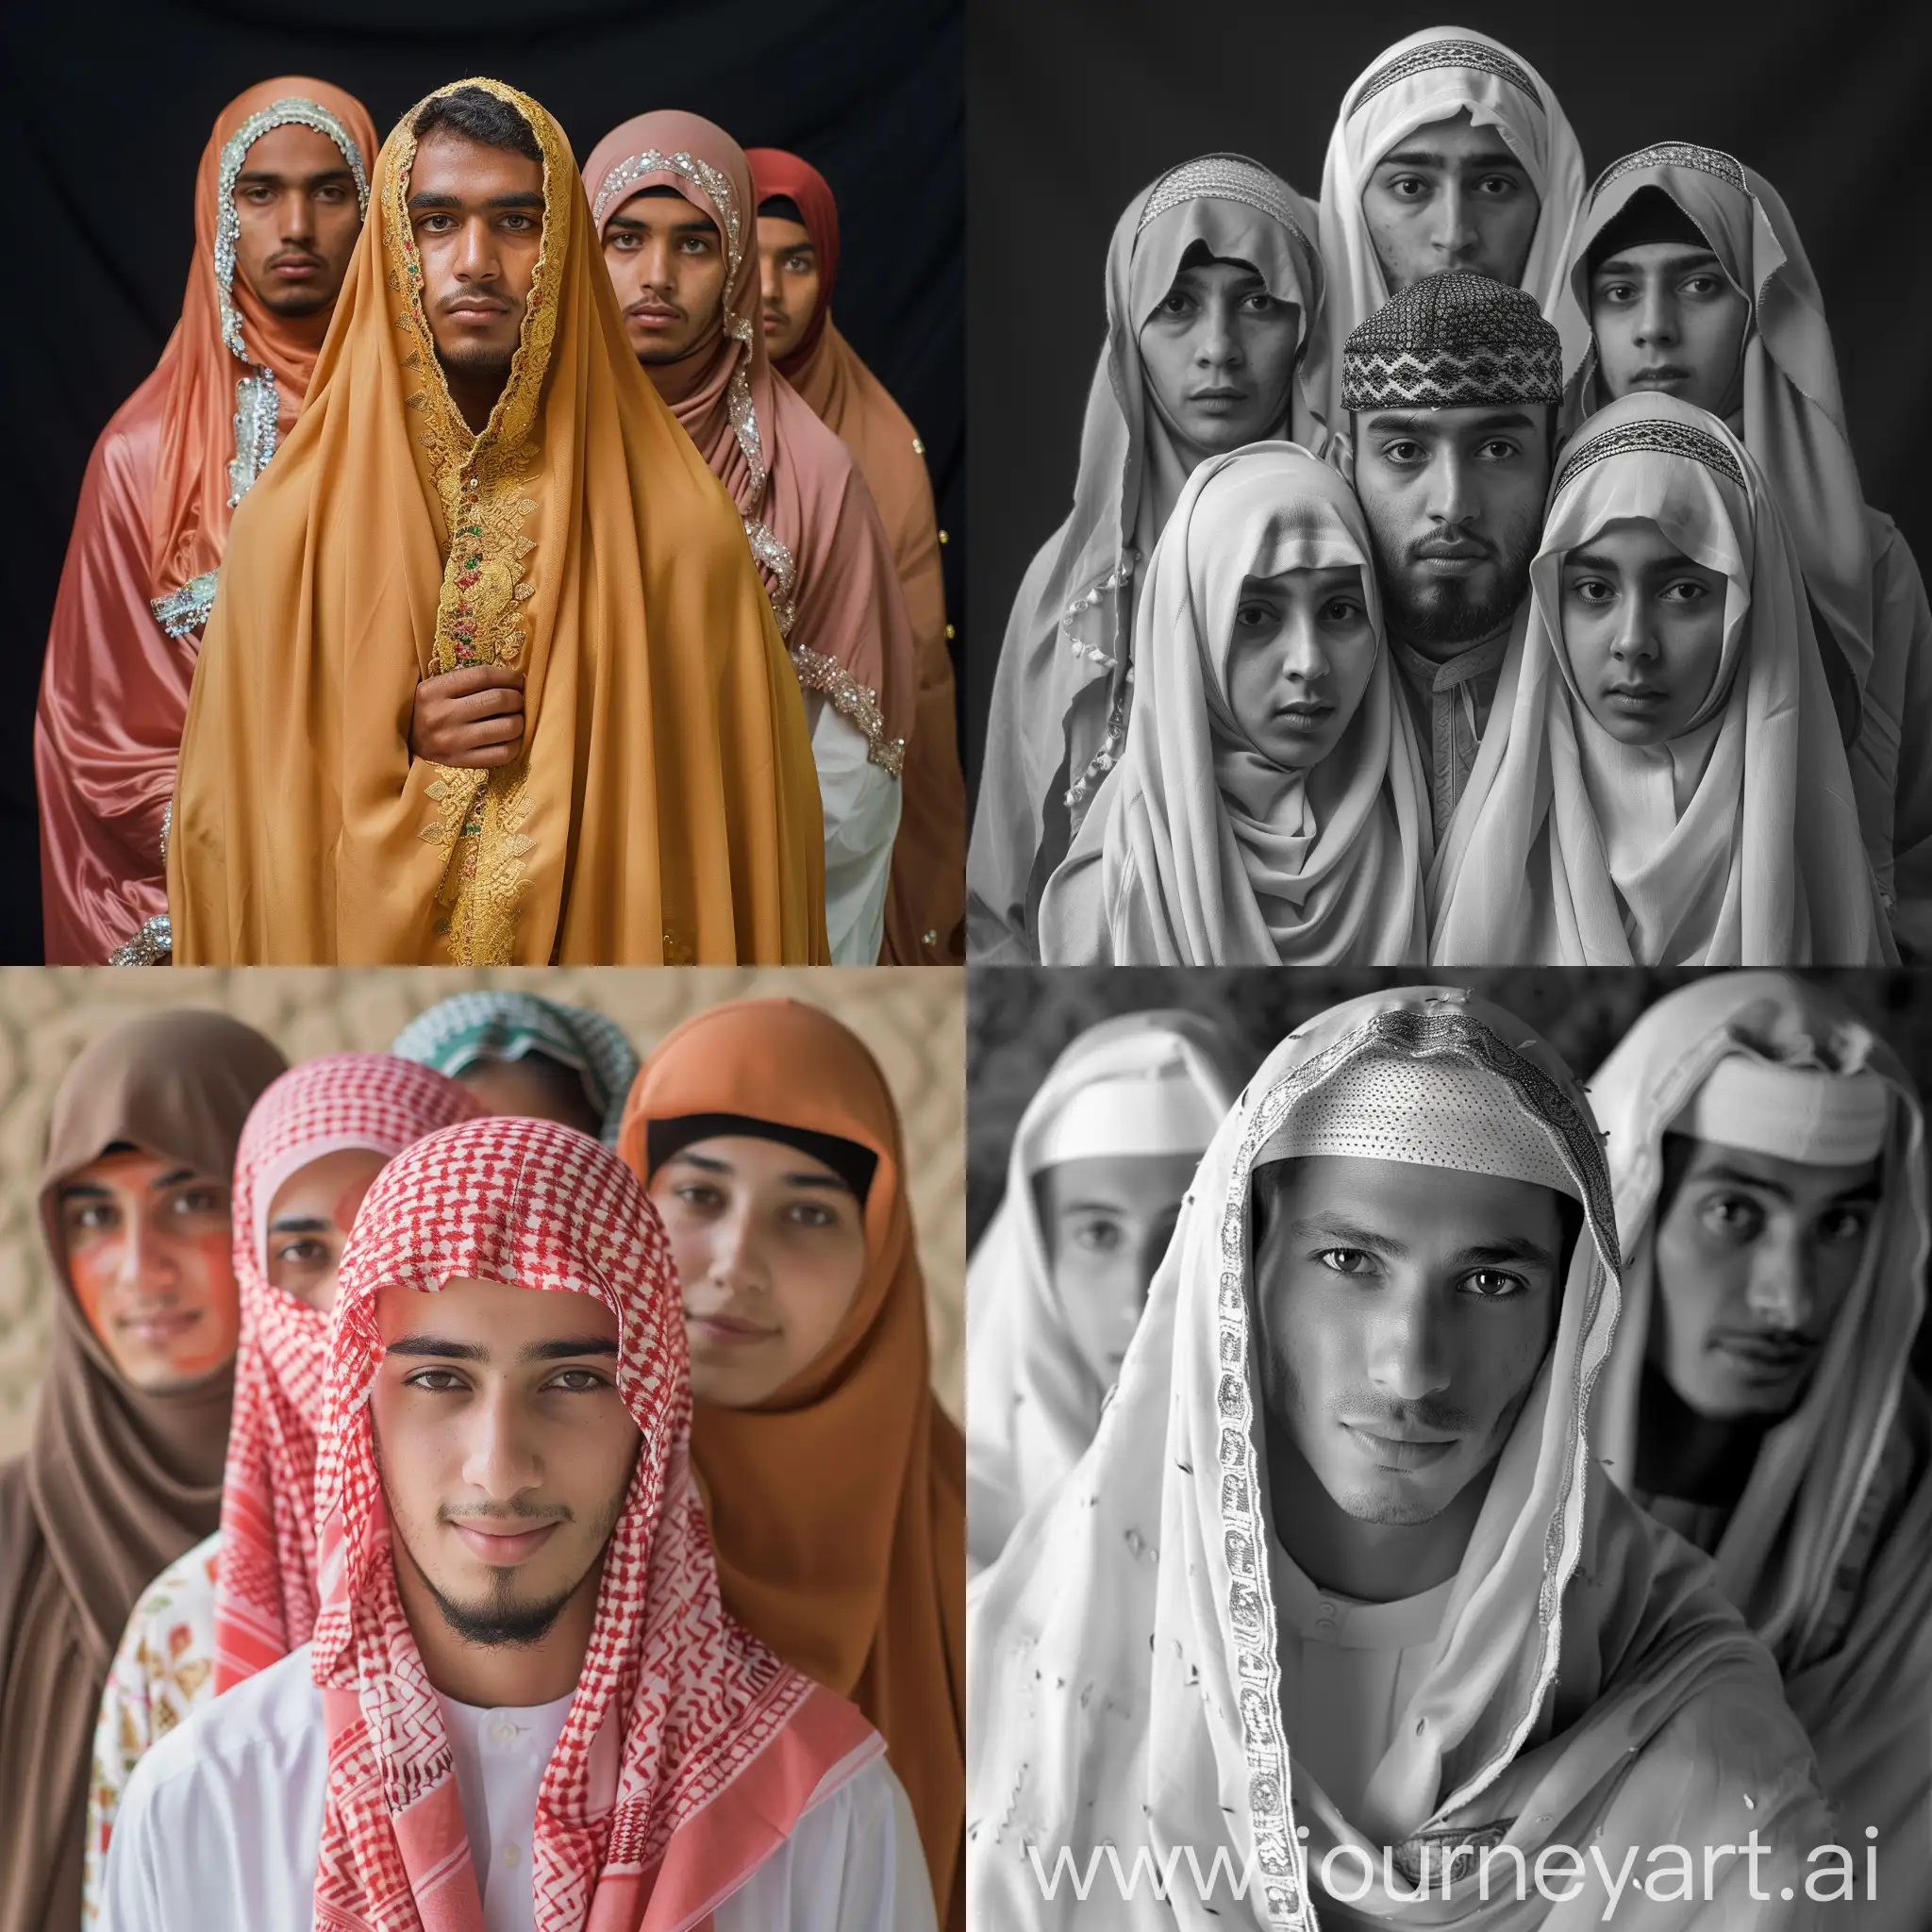 Young Muslim man with his 4 wives. Photography, using a 50mm prime lens for sharp focus on the subjects